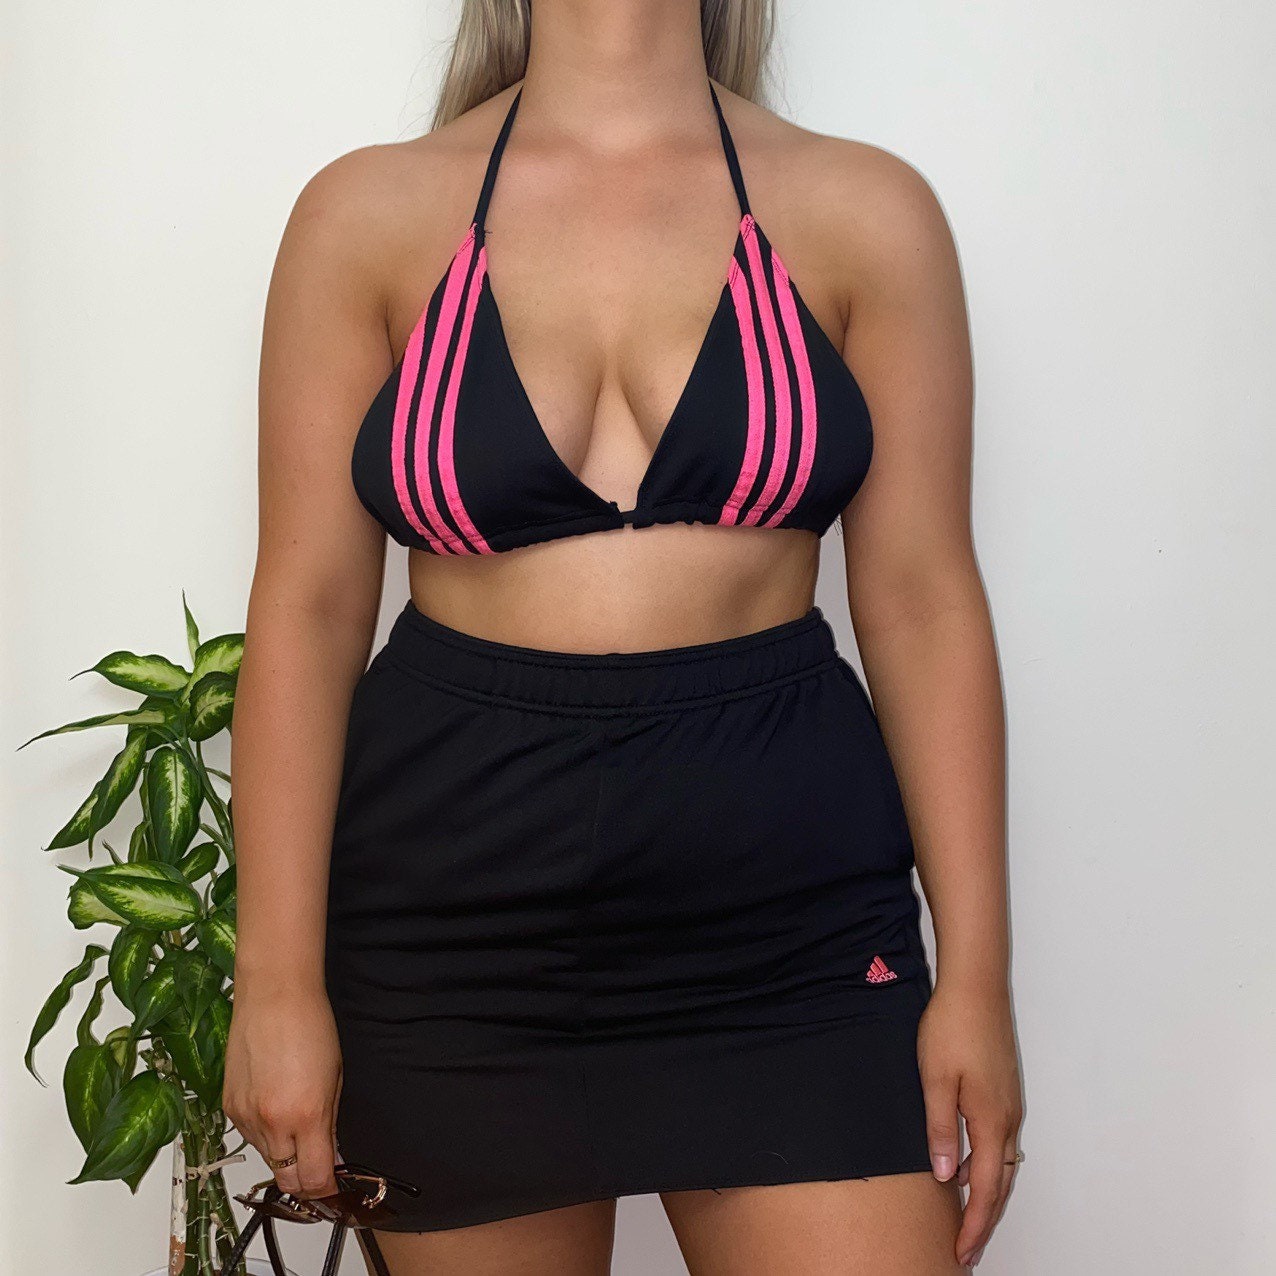 model wearing adidas triangle bikini crop top with hot pink 3 stripe detail and matching black skirt with small pink adidas logo